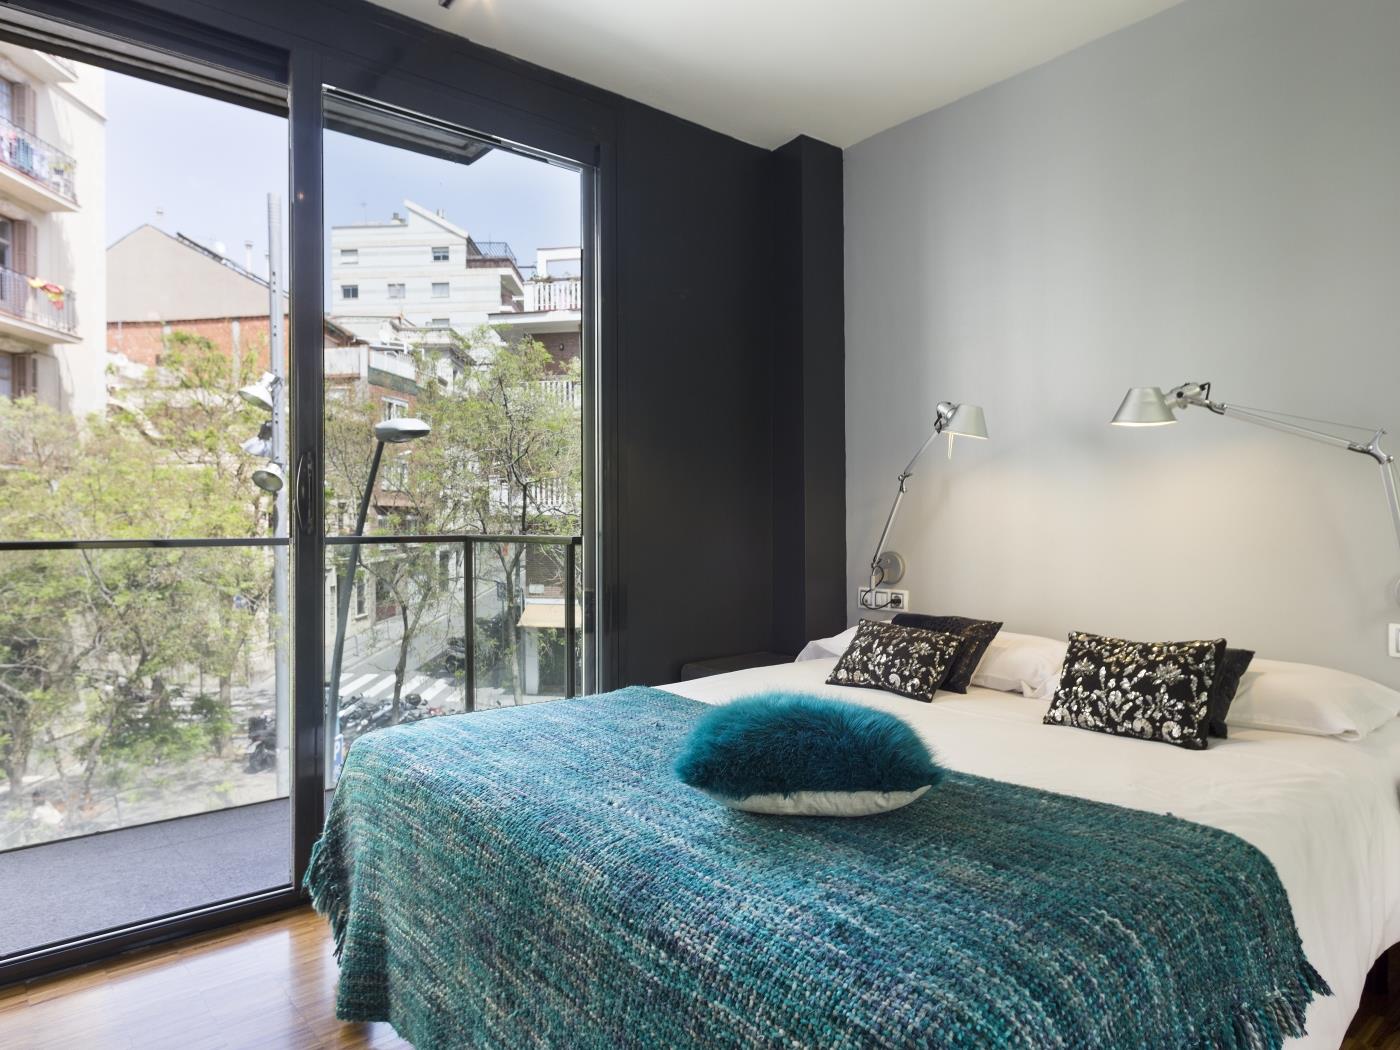 Executive Corporate Apartment Rentals in Barcelona for 6 - My Space barcelona Apartments